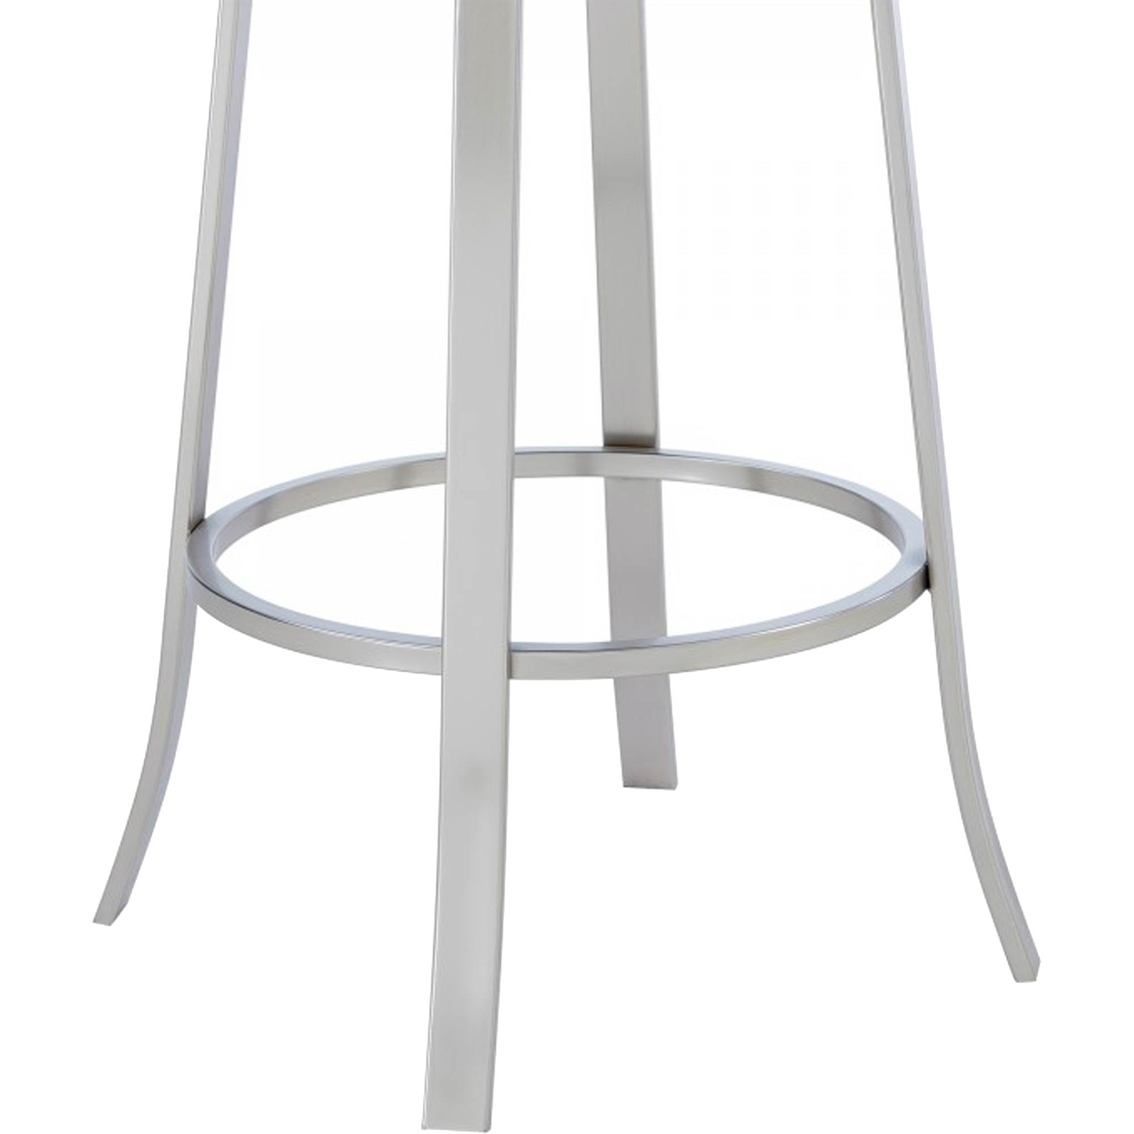 Armen Living Pia Barstool in Brushed Stainless Steel Finish and Black Faux Leather - Image 6 of 7